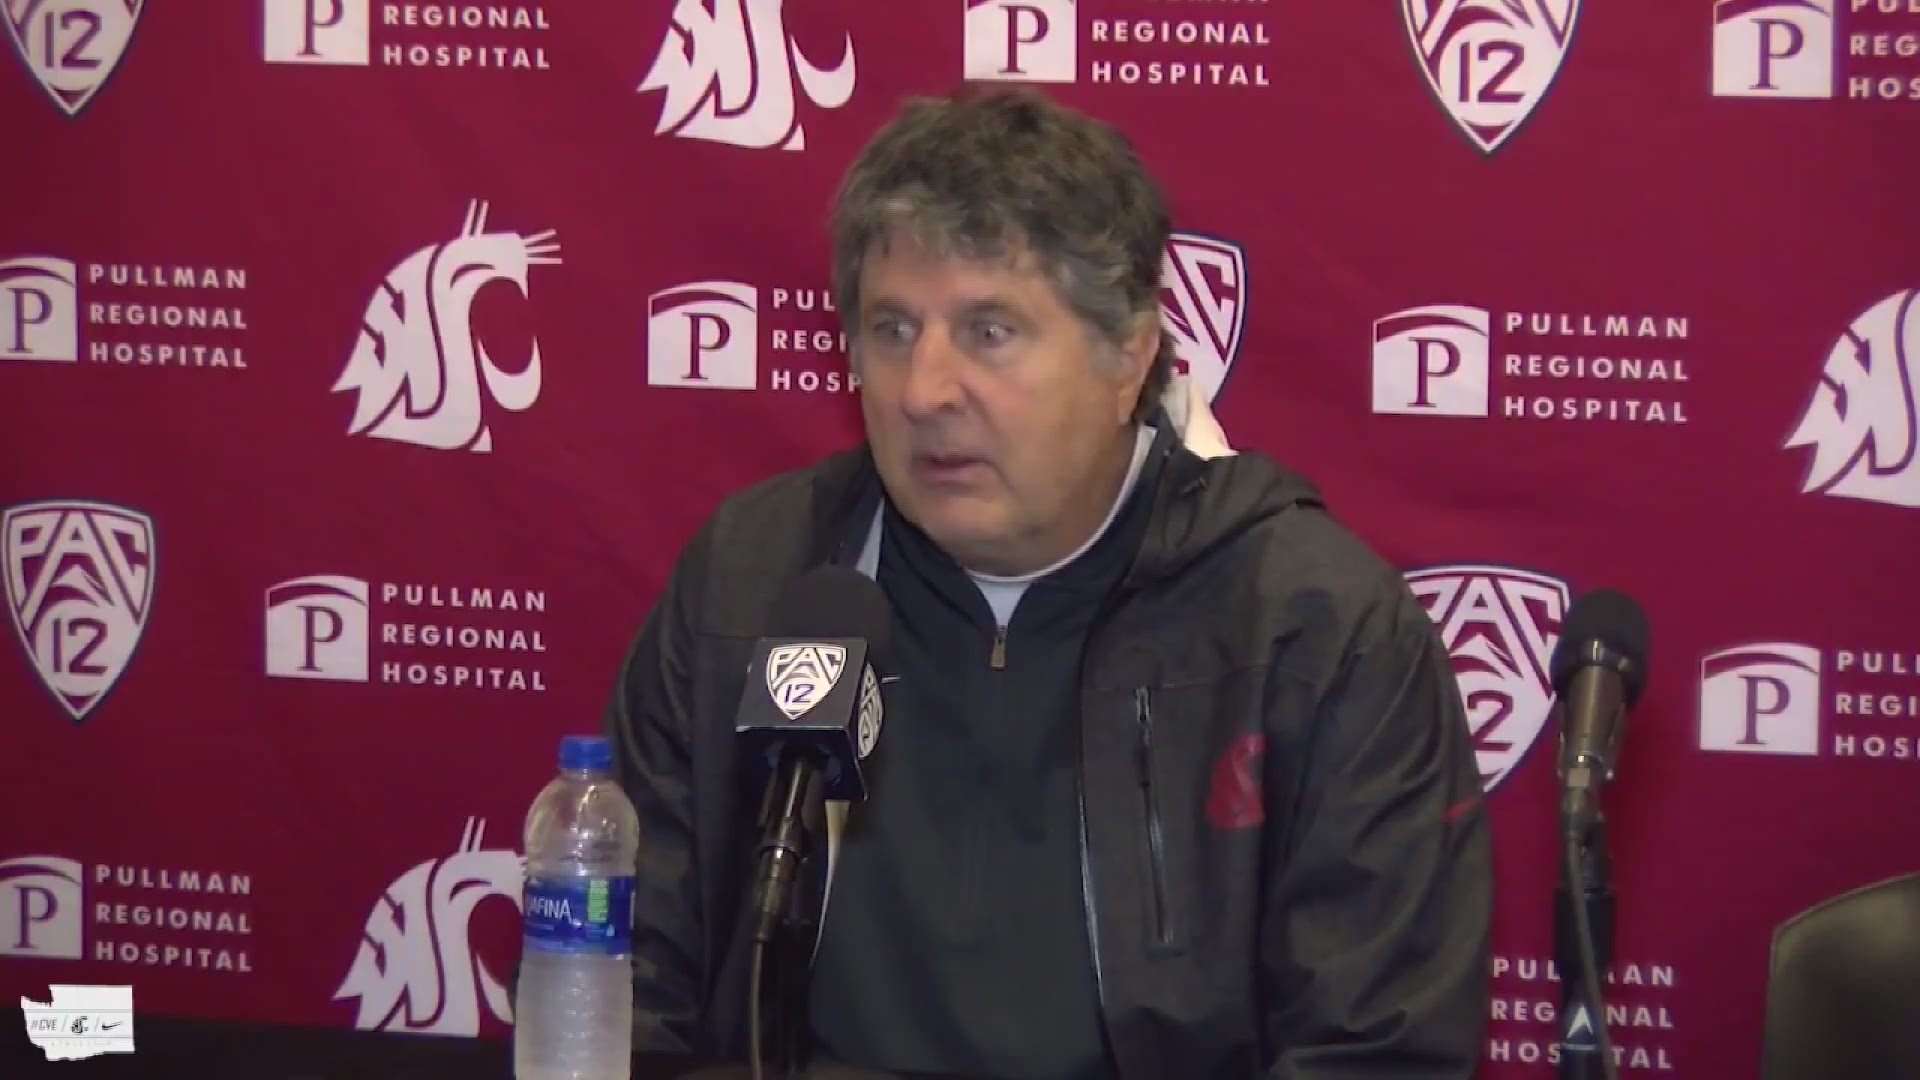 WSU head coach Mike Leach tore into his team after a 38-13 loss to Utah, the Cougs second in a row. He called the team "fat, lazy, happy, and entitled."